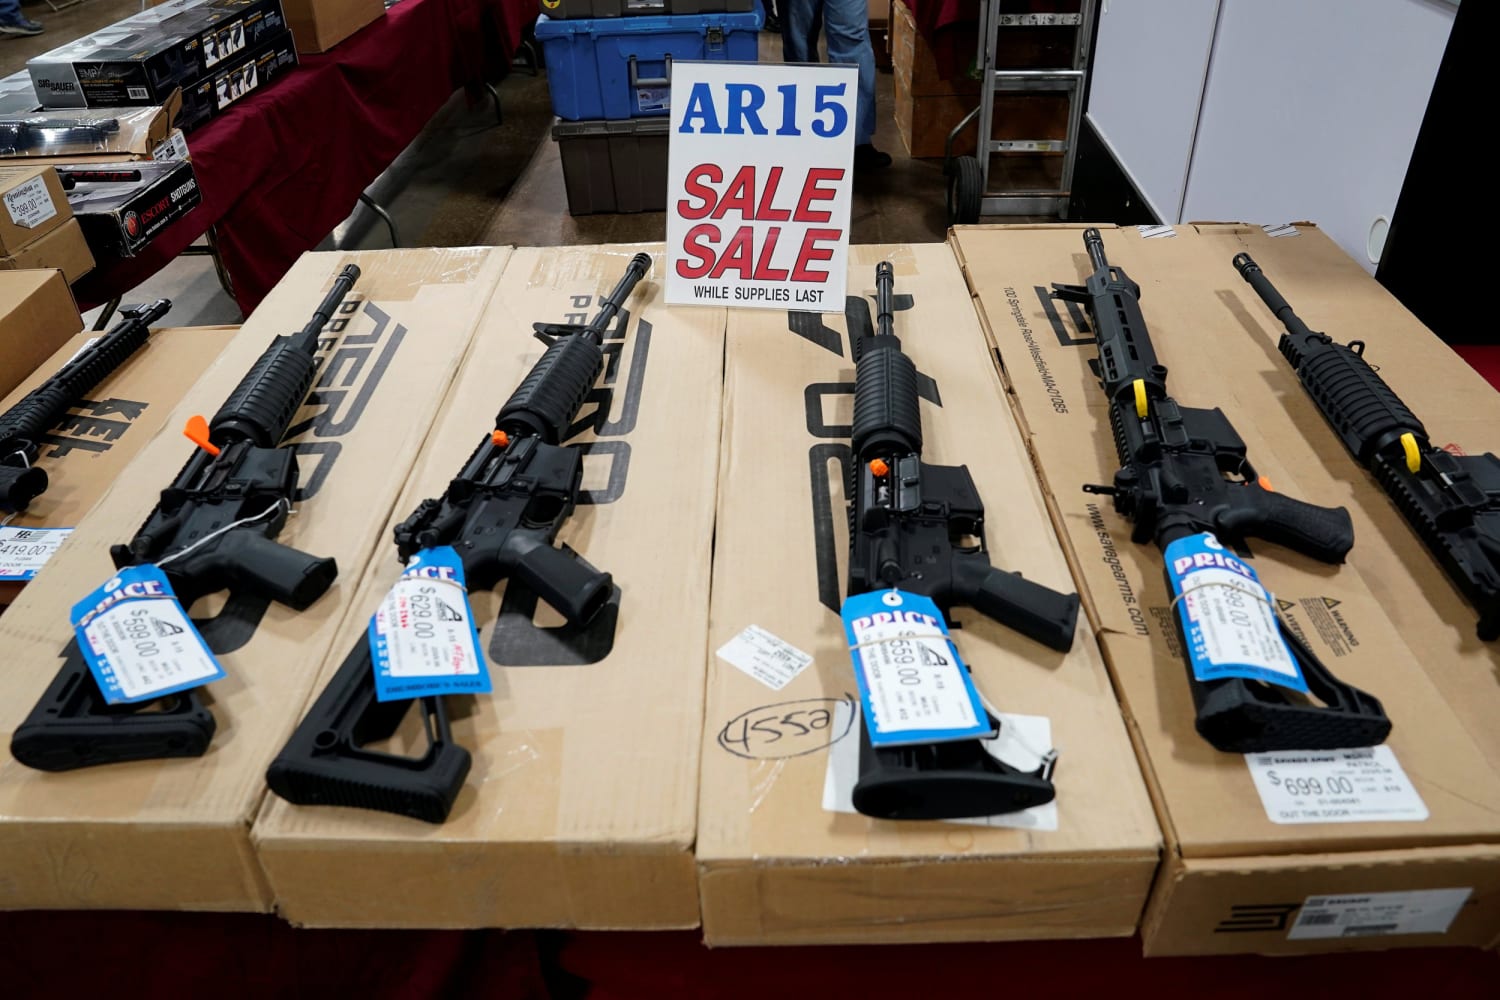 The Parkland Shooter's Ar-15 Was Designed To Kill As Efficiently As Possible